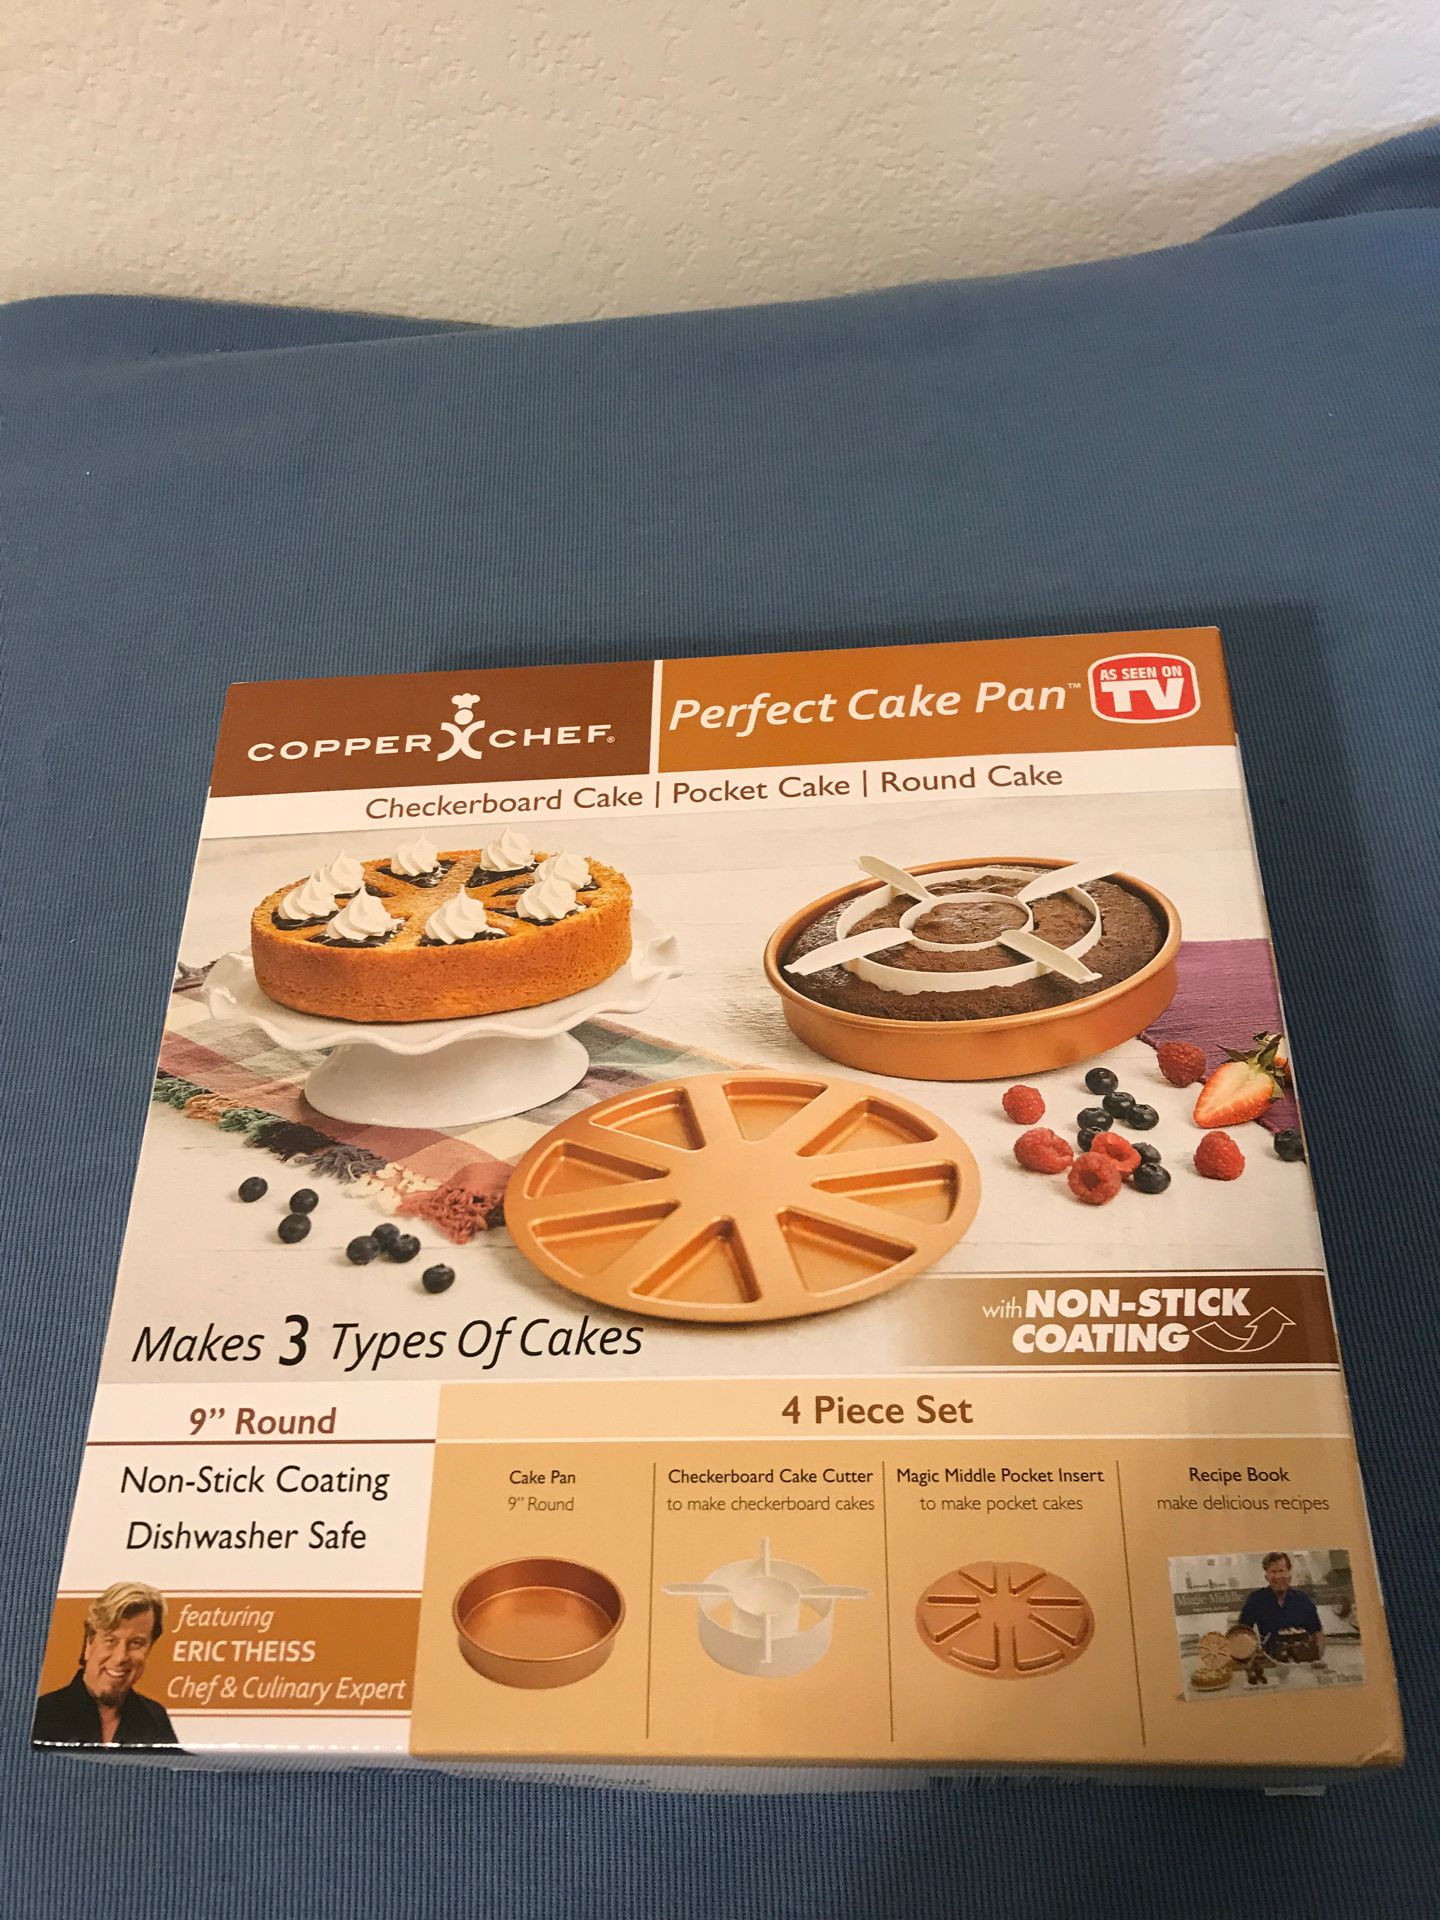 Brand new copper chef perfect cake pan in box, never opened